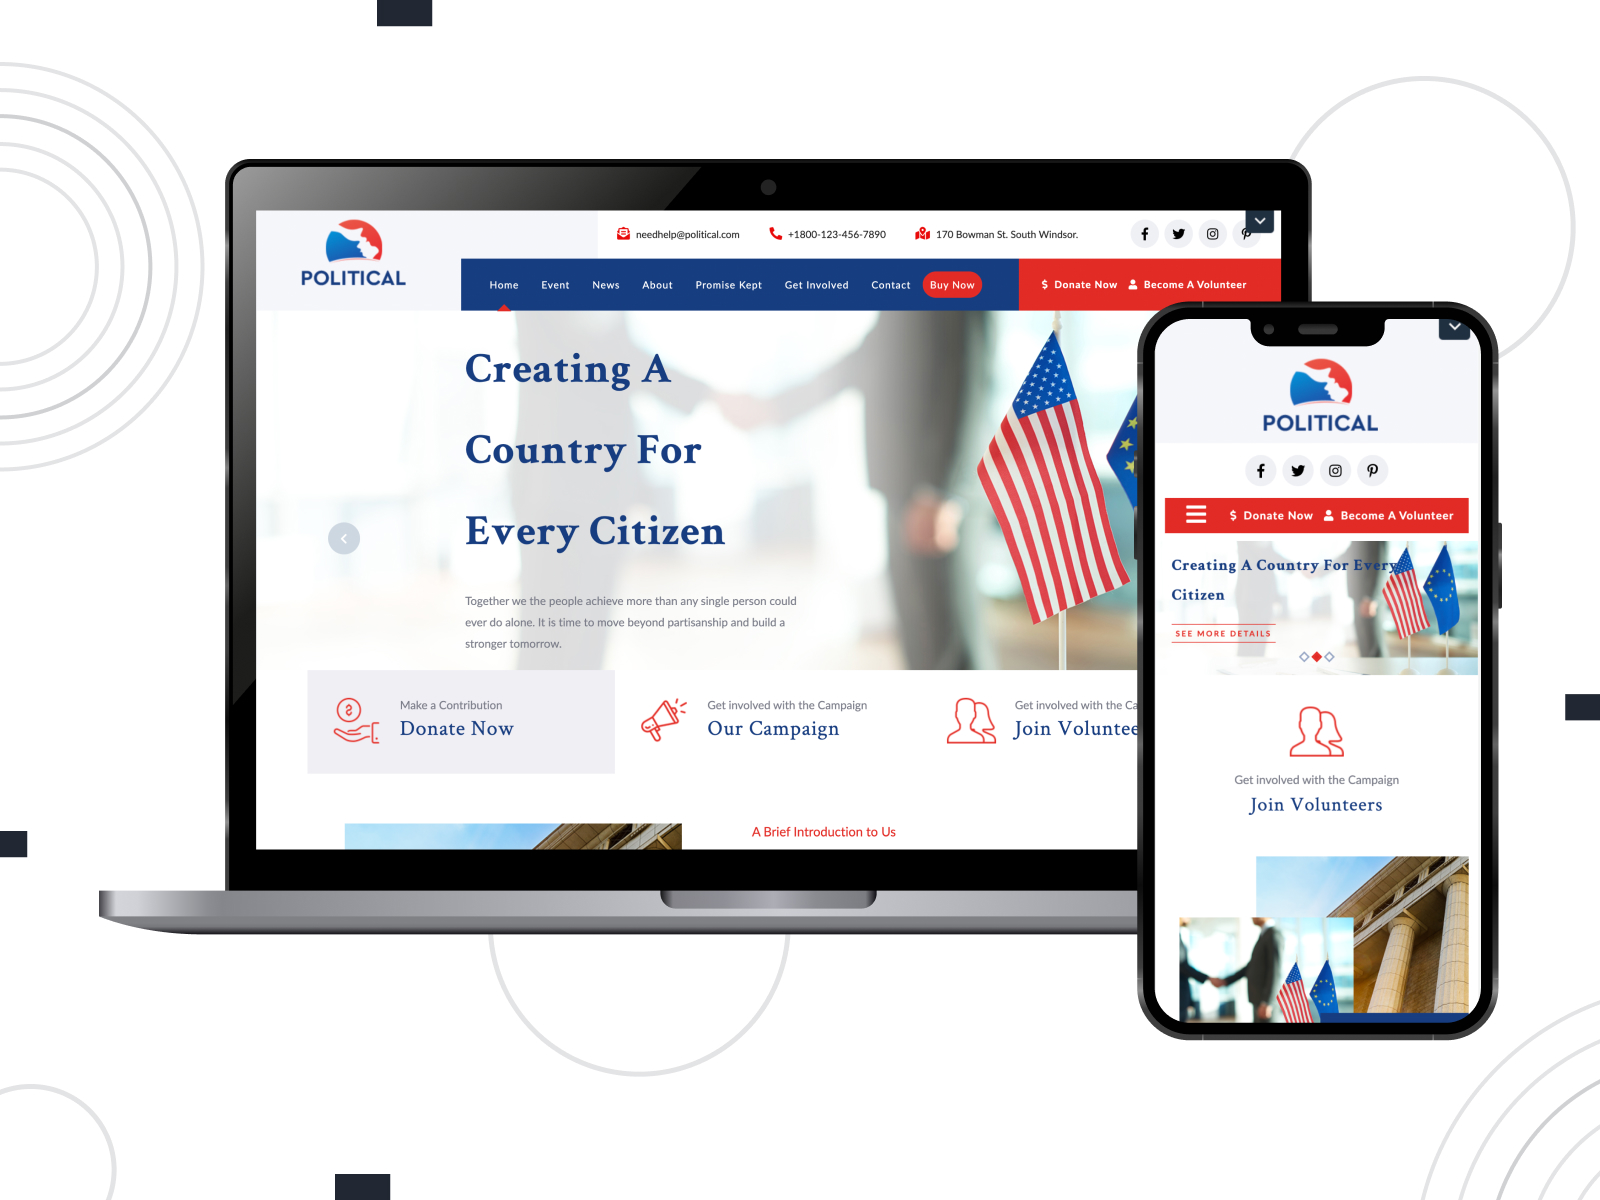 Representation of Political Campaign - free, innovative & responsive theme for political candidates with WooCommerce compatibility in darkorange, white, and midnightblue color gradation.